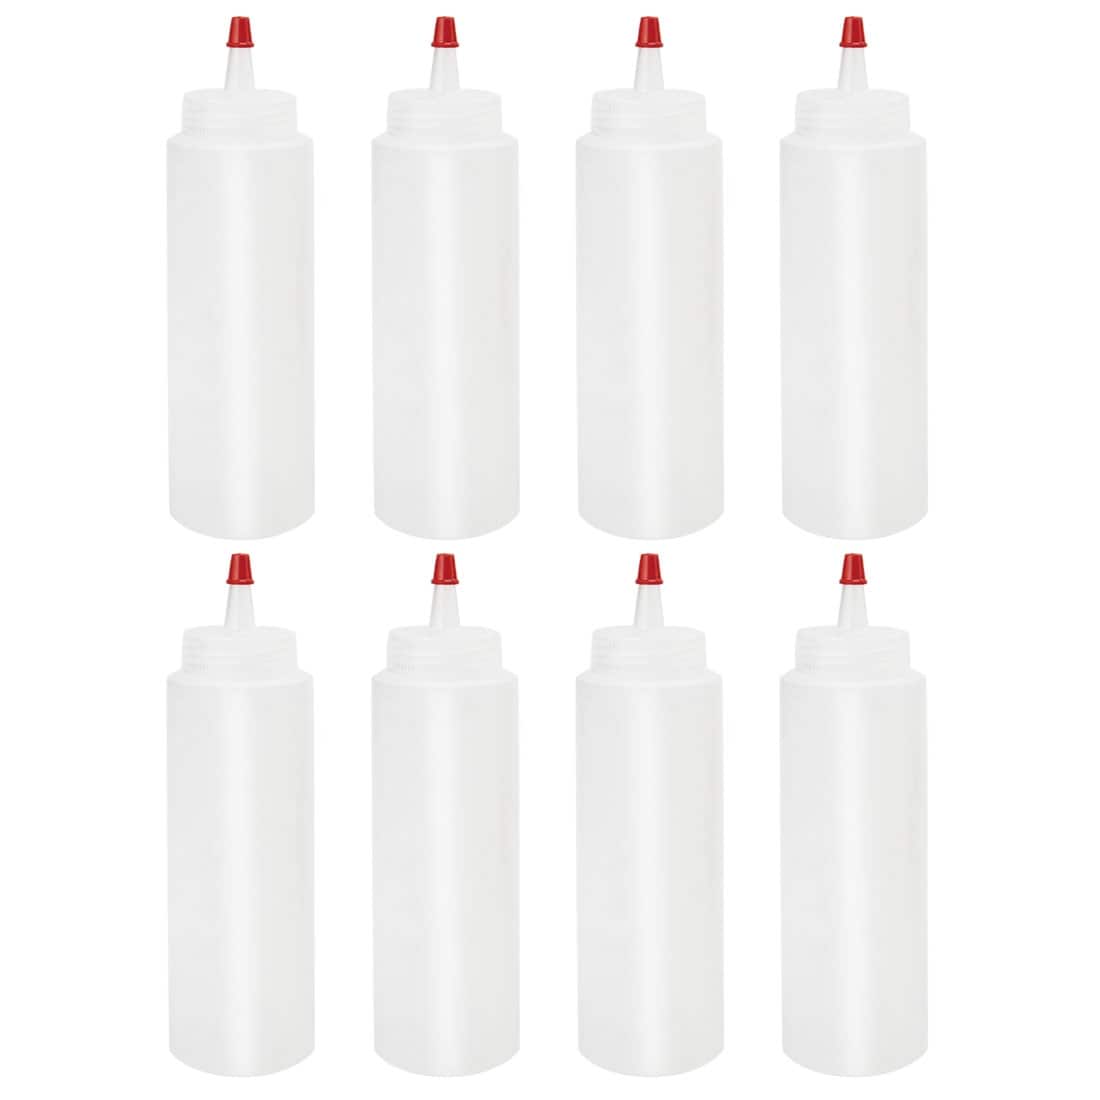 https://ak1.ostkcdn.com/images/products/is/images/direct/dde01629bada68825e9e987f3ff4bfc52710c03c/8pcs-16-OZ-Plastic-Condiment-Squeeze-Bottles-with-Red-Cap-Perfect-for-Cooking-Salad-Ketchup-BBQ-Syrup-Condiments-Dispenser.jpg